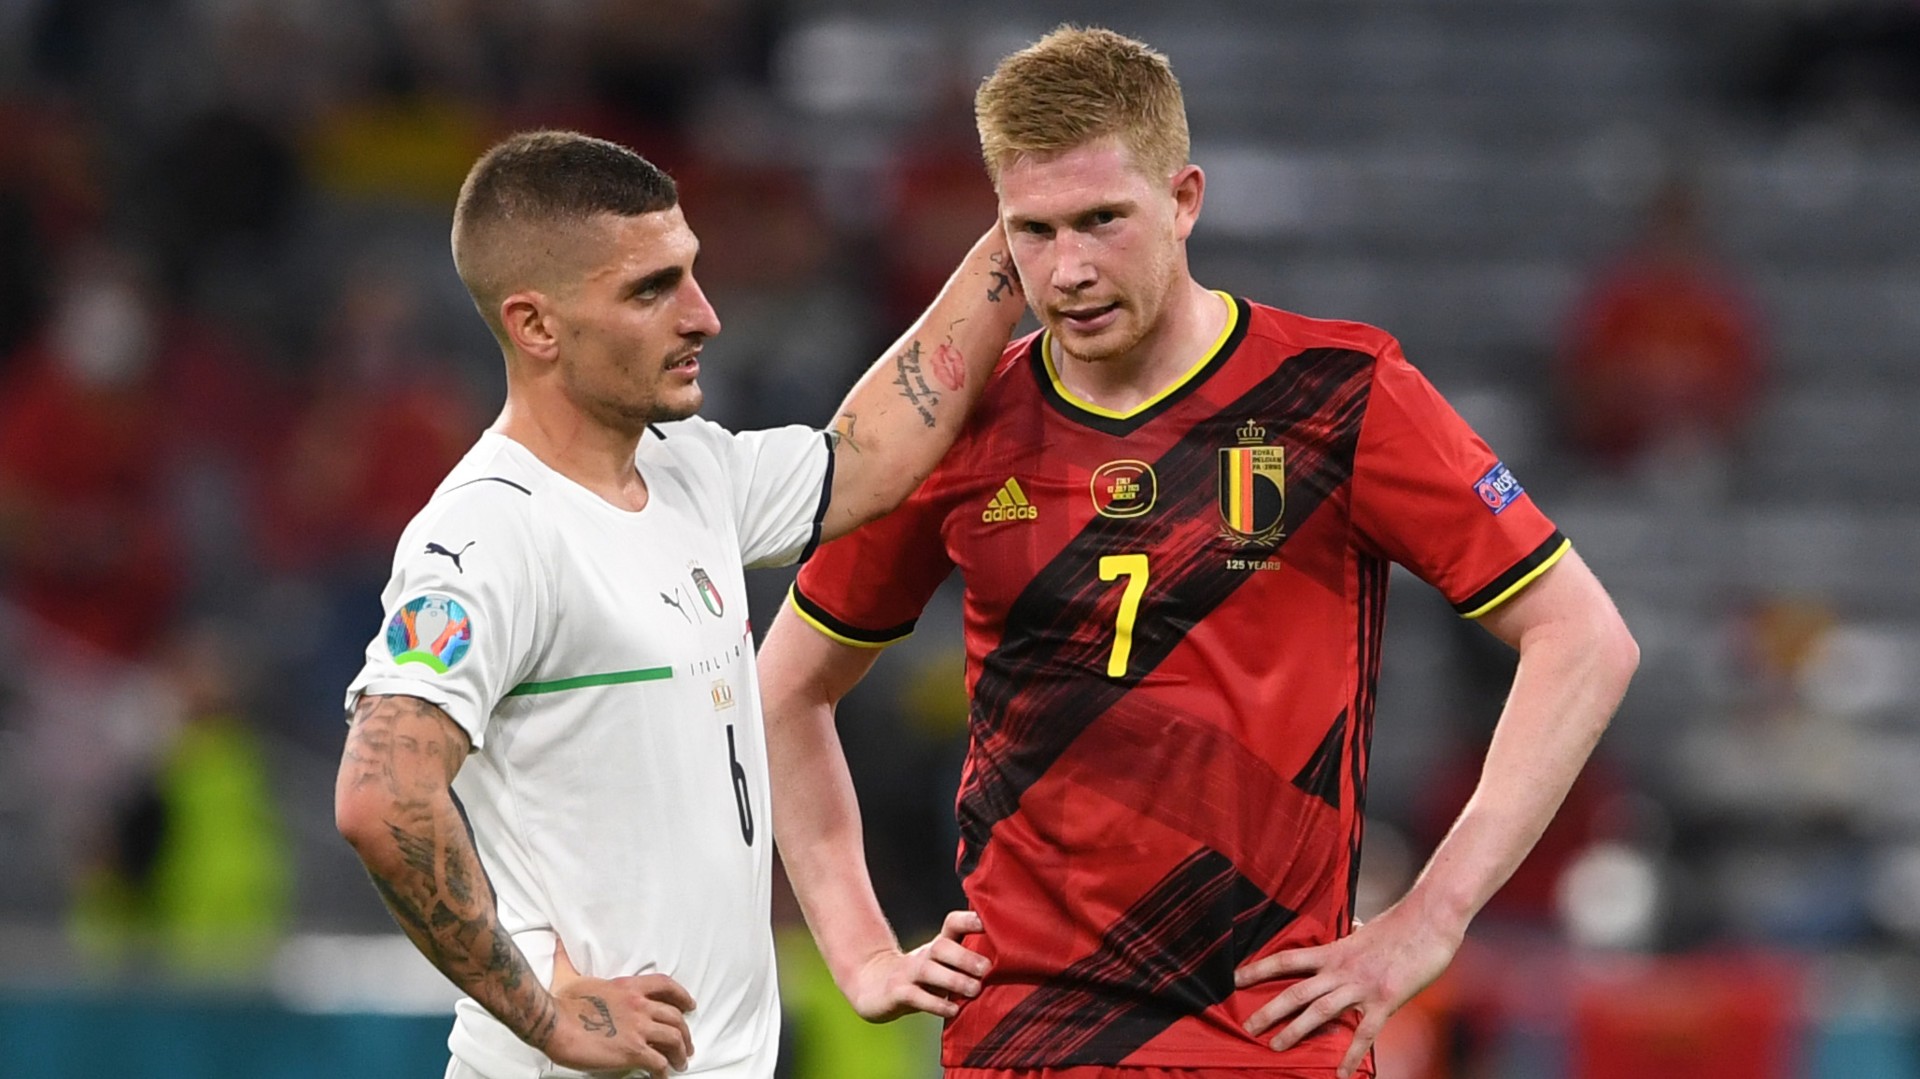 ‘We are just Belgium' - De Bruyne says Golden Generation cannot compete with France or Italy